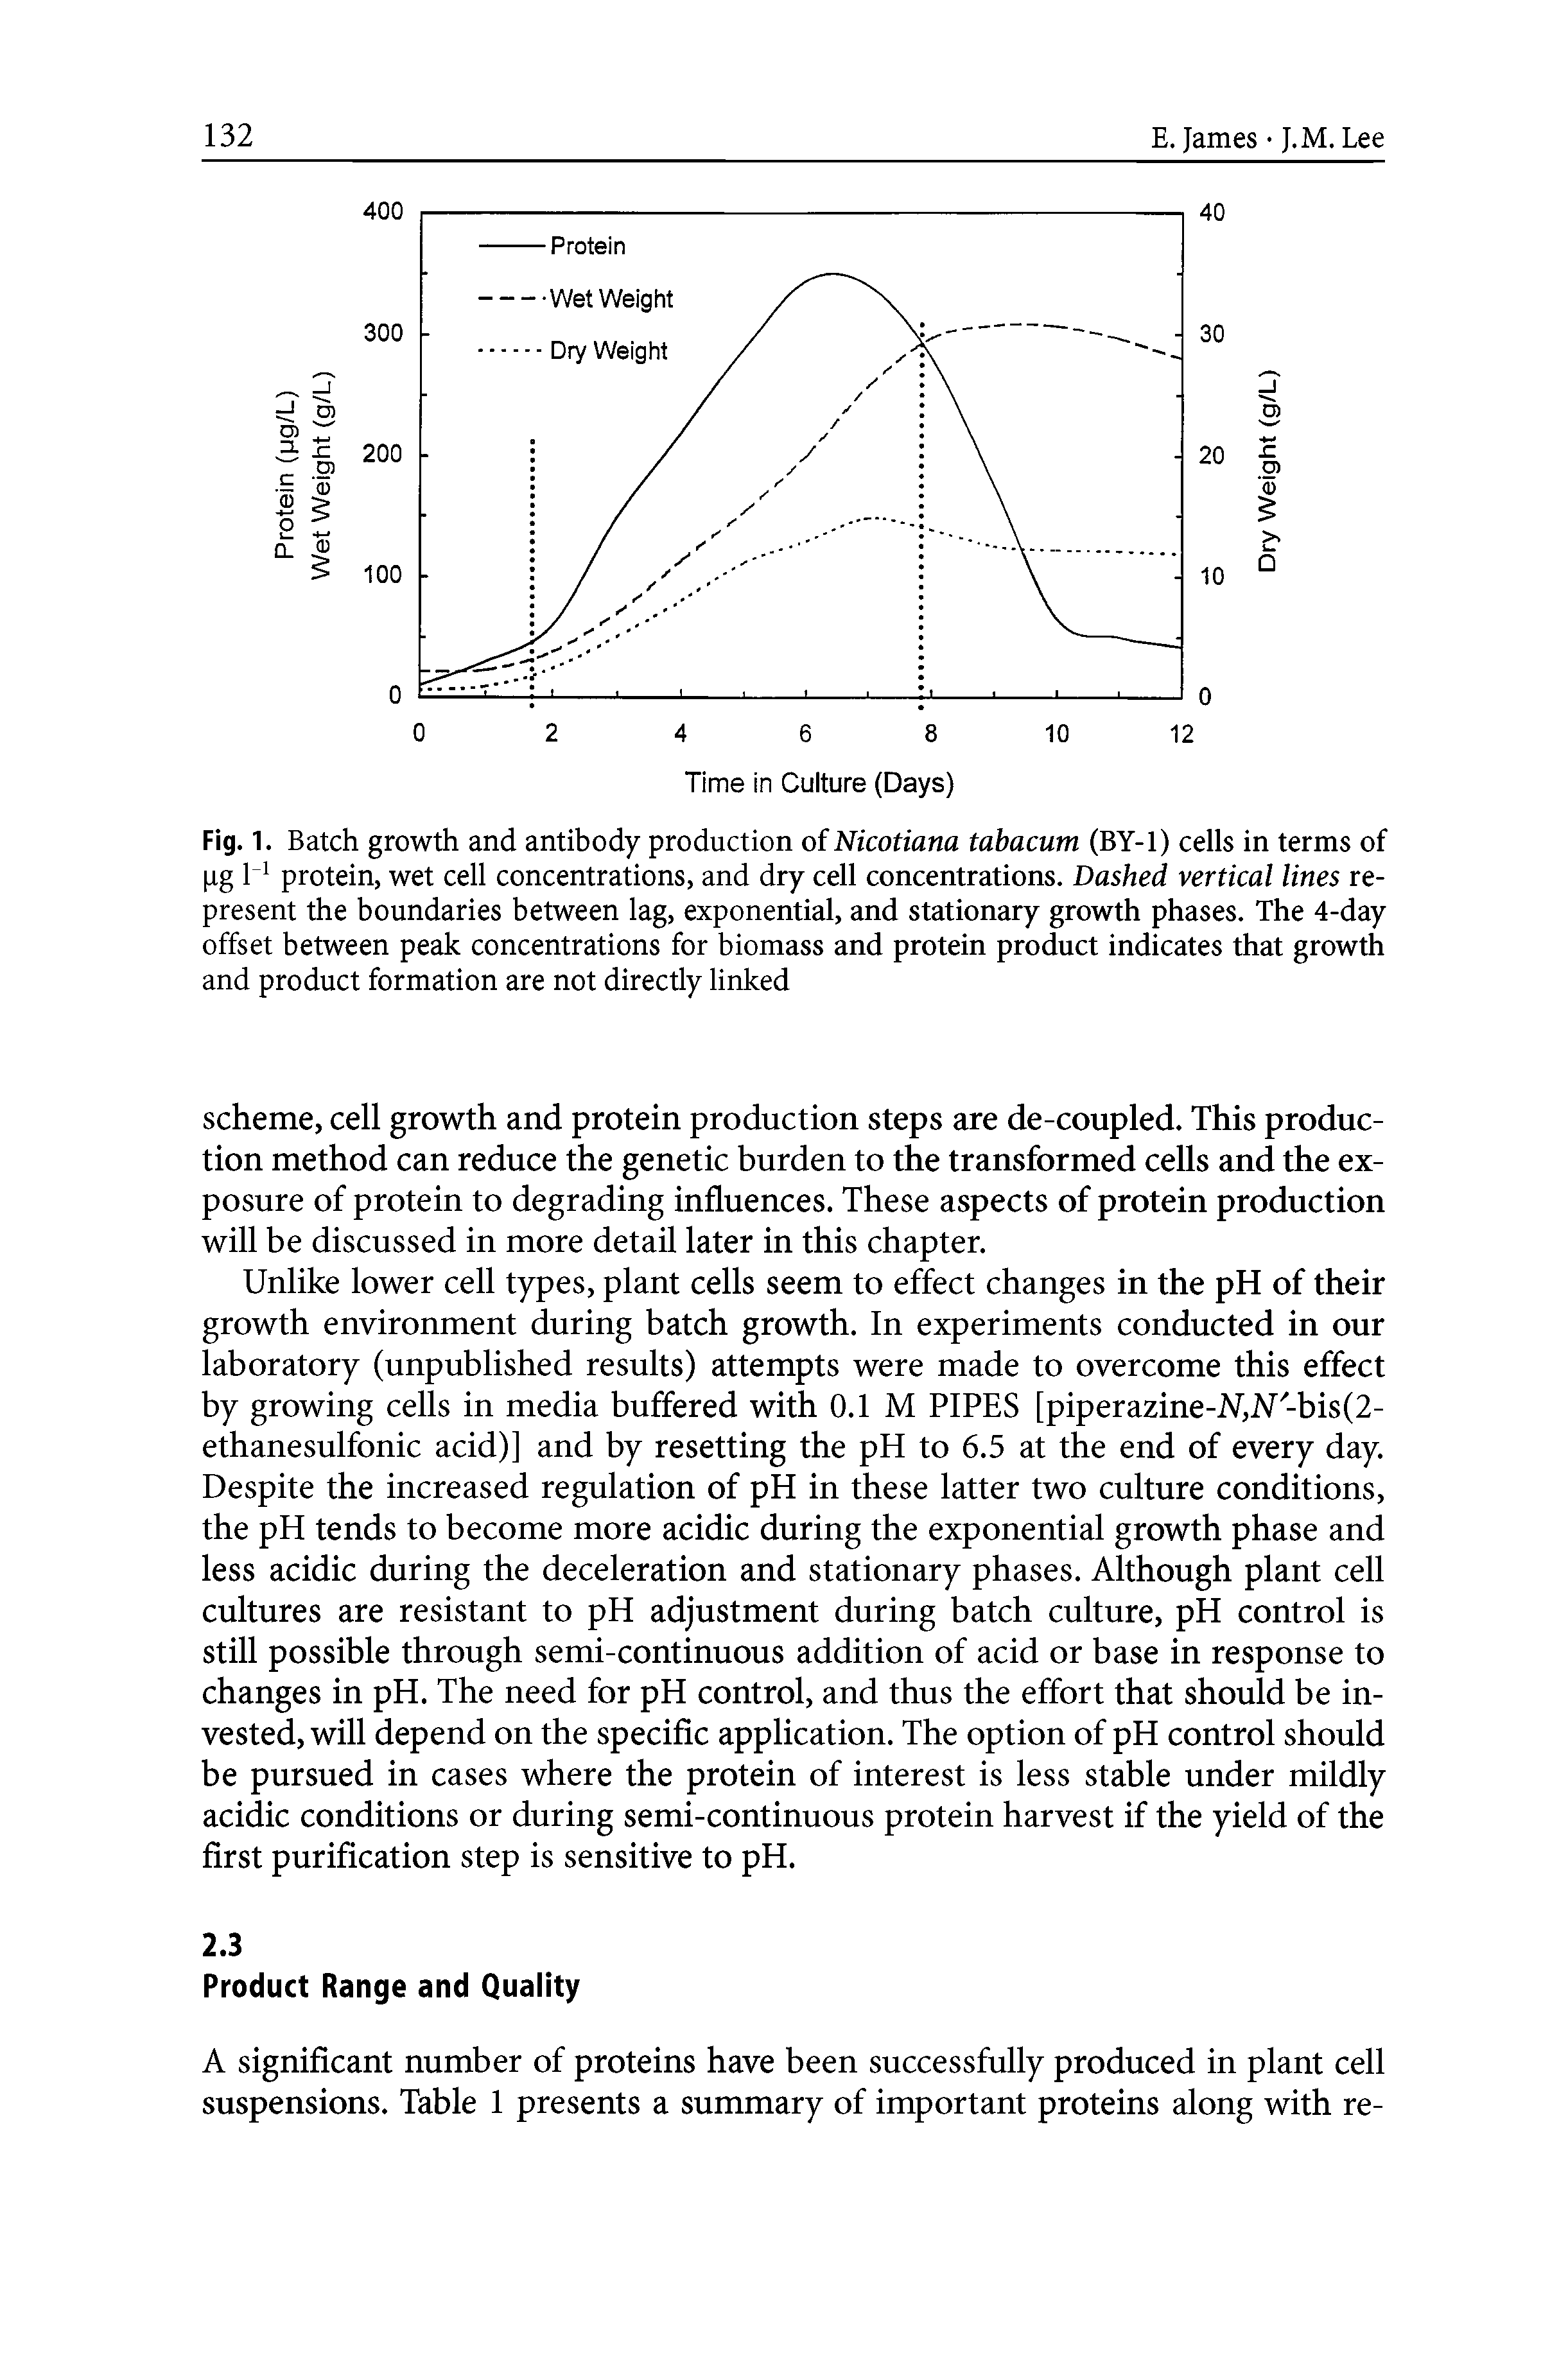 Fig. 1. Batch growth and antibody production of Nicotiana tabacum (BY-1) cells in terms of pg 1 1 protein, wet cell concentrations, and dry cell concentrations. Dashed vertical lines represent the boundaries between lag, exponential, and stationary growth phases. The 4-day offset between peak concentrations for biomass and protein product indicates that growth and product formation are not directly linked...